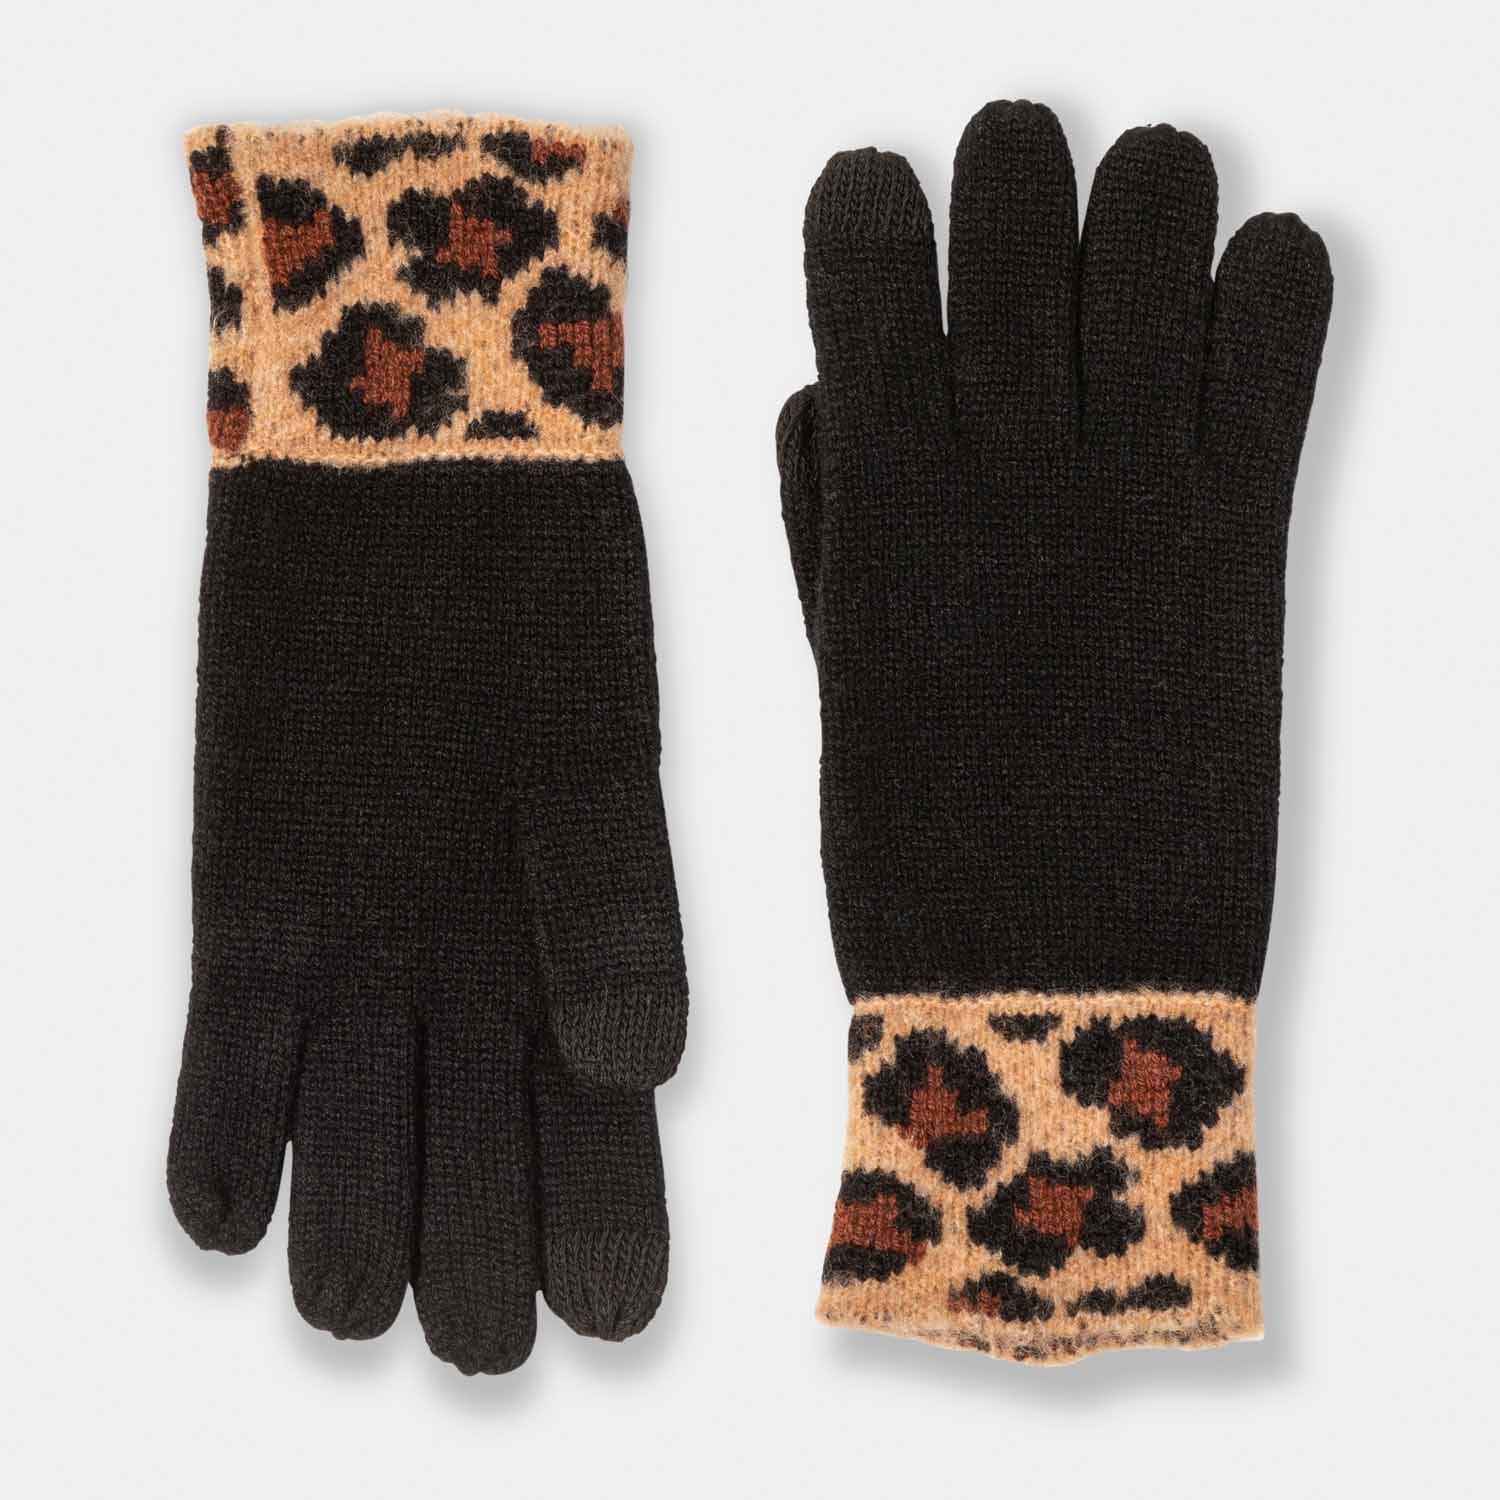 Picture of knit cashmere glove with cheetah print cuff detail, black and tan